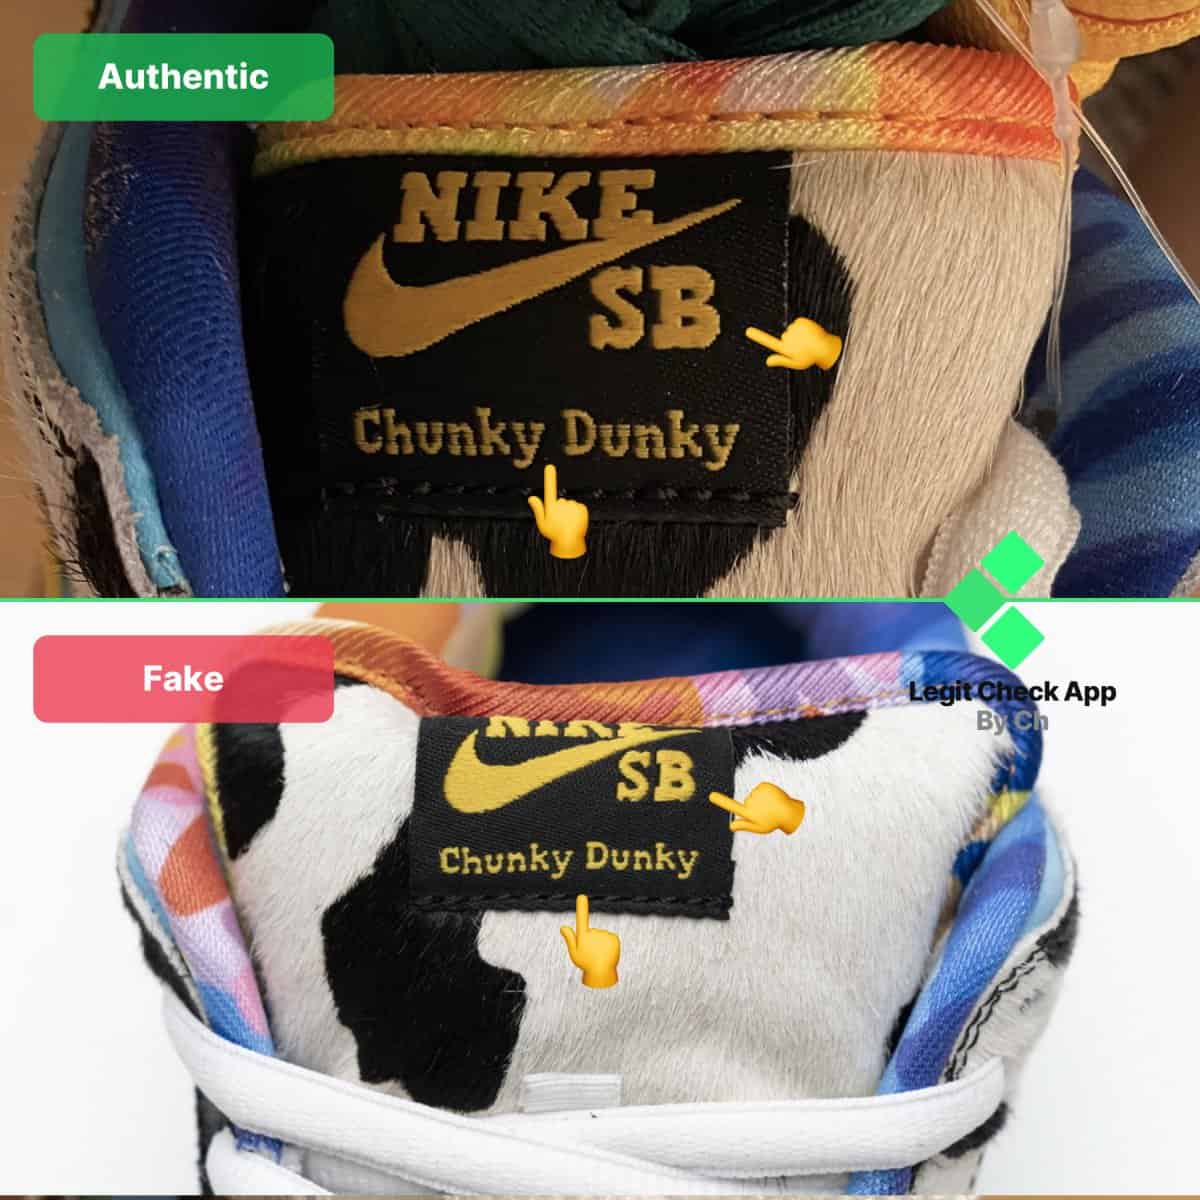 how to spot fake ben & jerry's chunky dunky